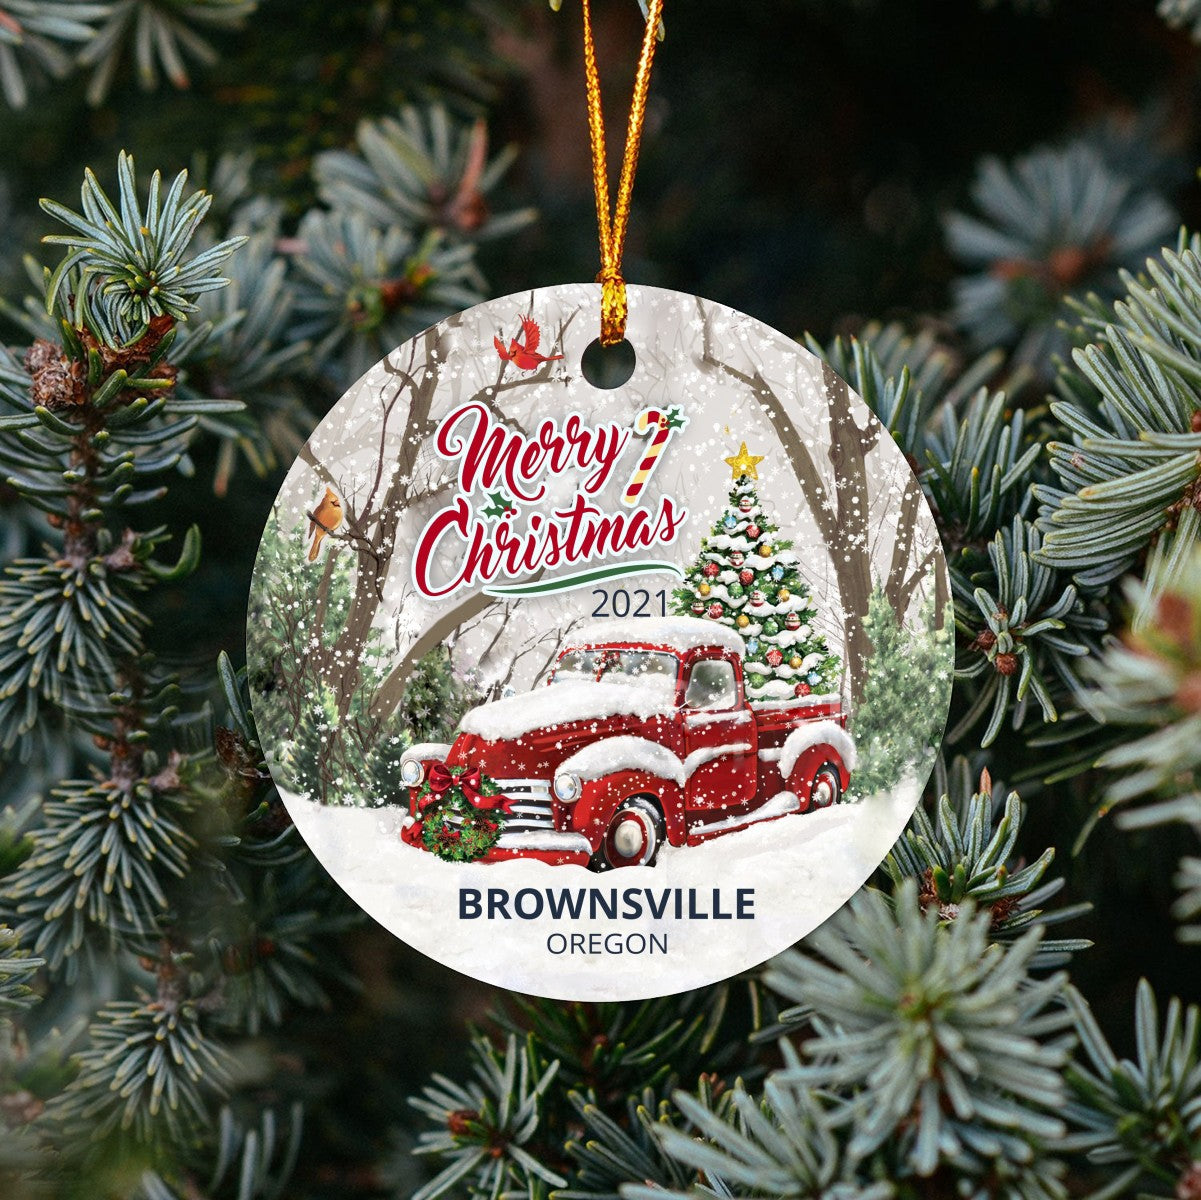 Christmas Tree Ornaments Brownsville - Ornament With Name City, State Brownsville Oregon OR Ornament - Red Truck Xmas Ornaments 3'' Plastic Gift For Family, Friend And Housewarming